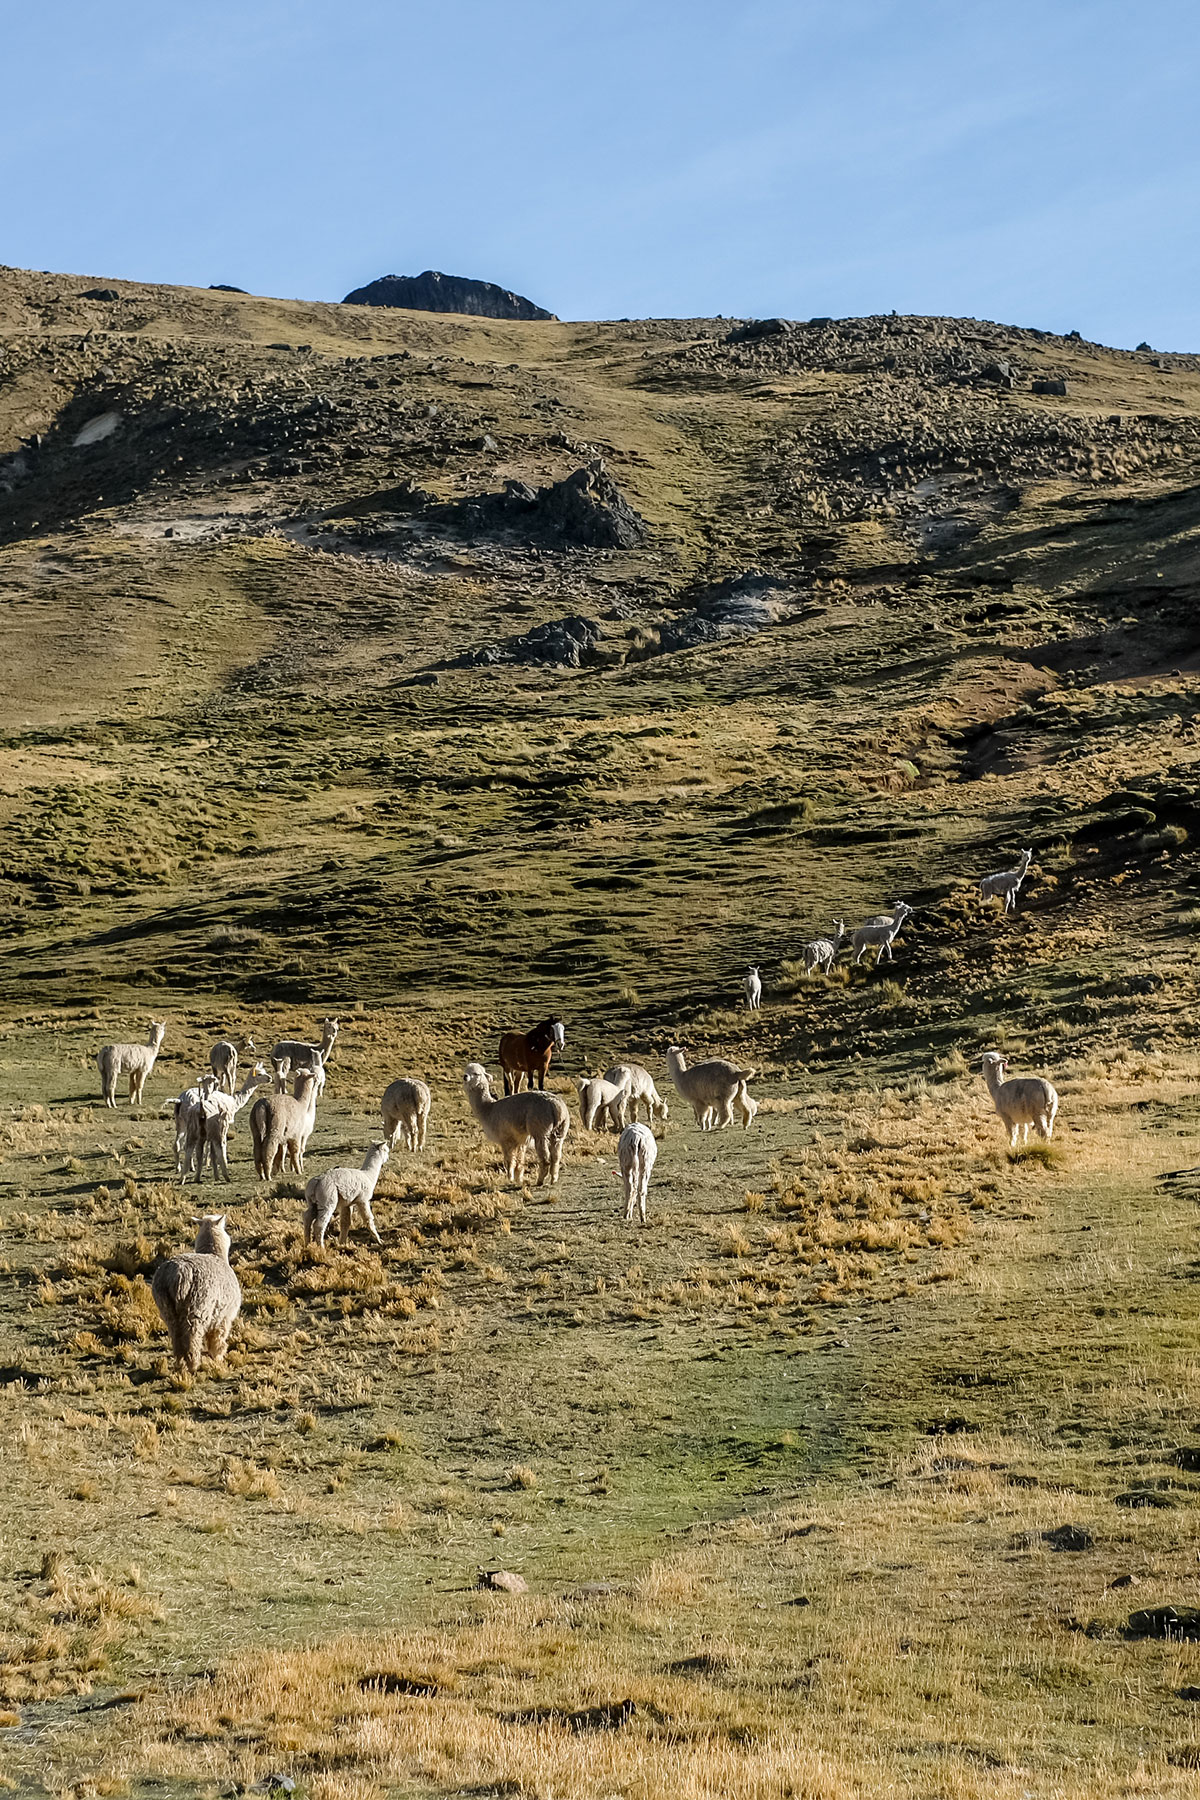 A wide-angle view of a herd of alpacas in a vast, open landscape. The rugged terrain and the direction of the herd moving towards the horizon give a sense of scale and the natural habitat of these animals.